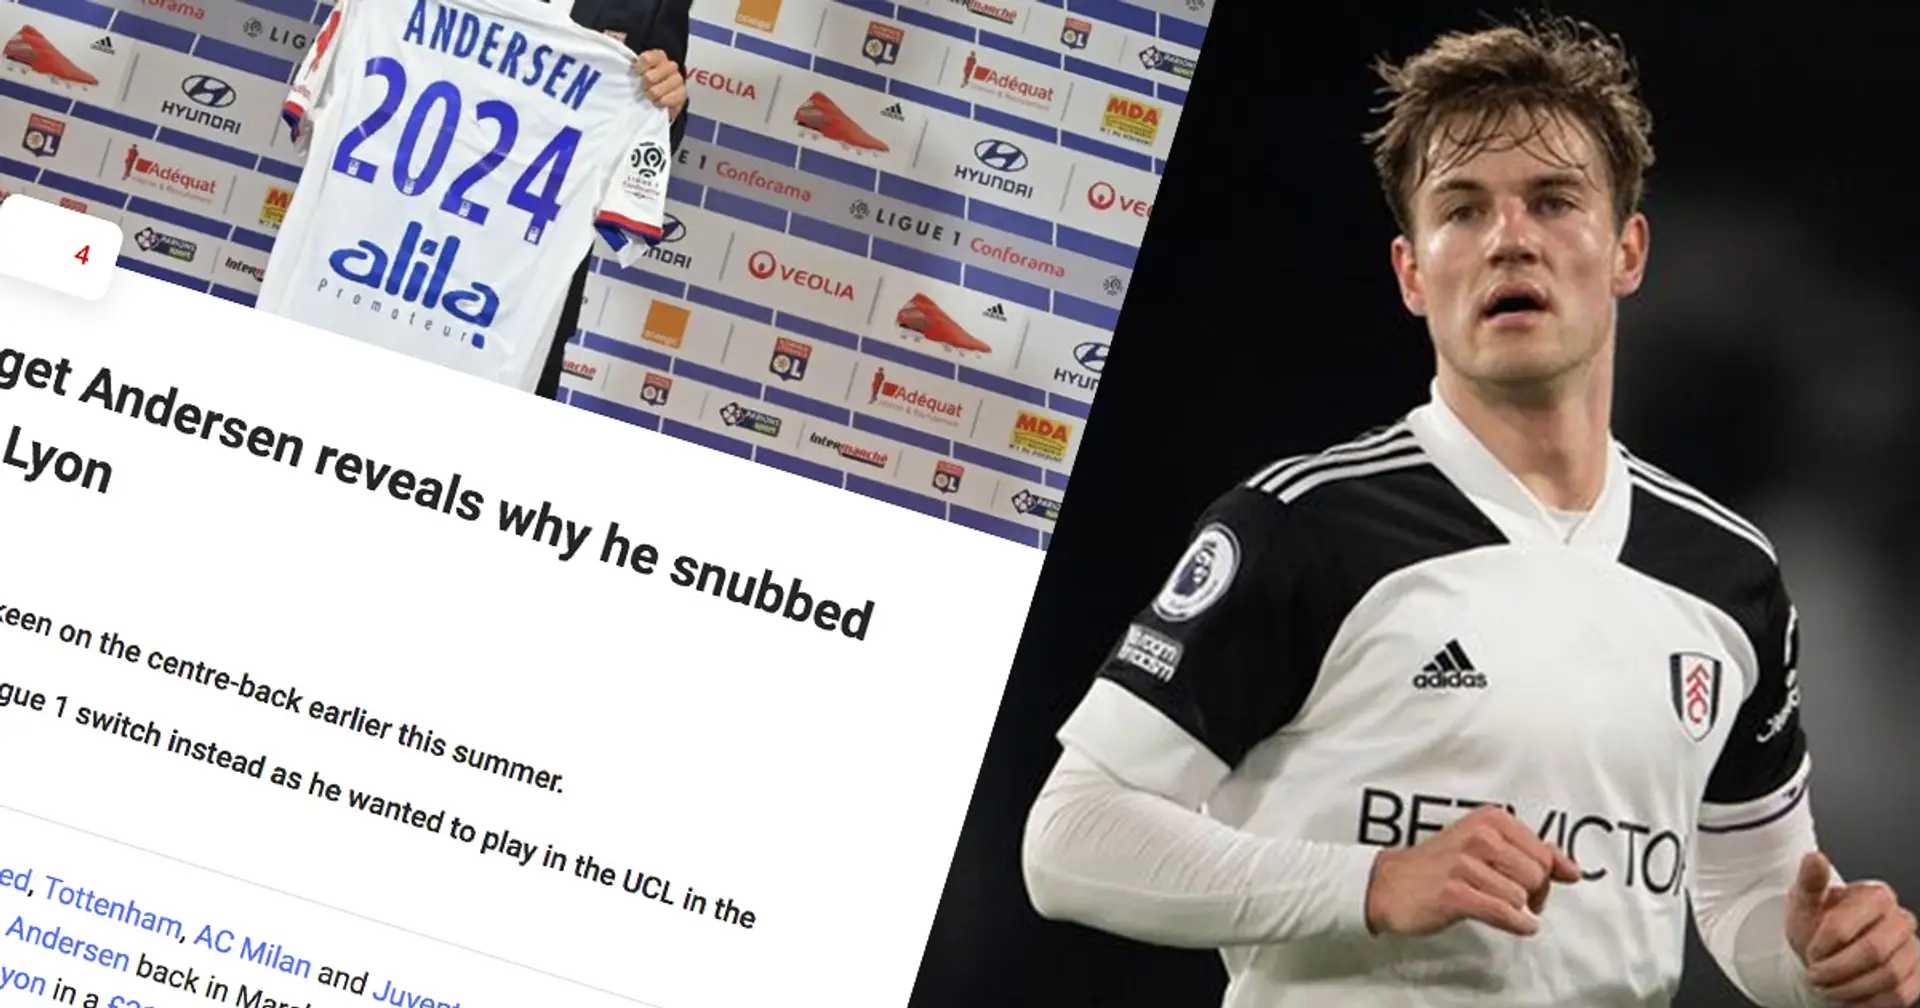 Fulham stalwart Andersen likely to join Arsenal – Gunners almost signed him in 2019 (reliability: 5 stars)